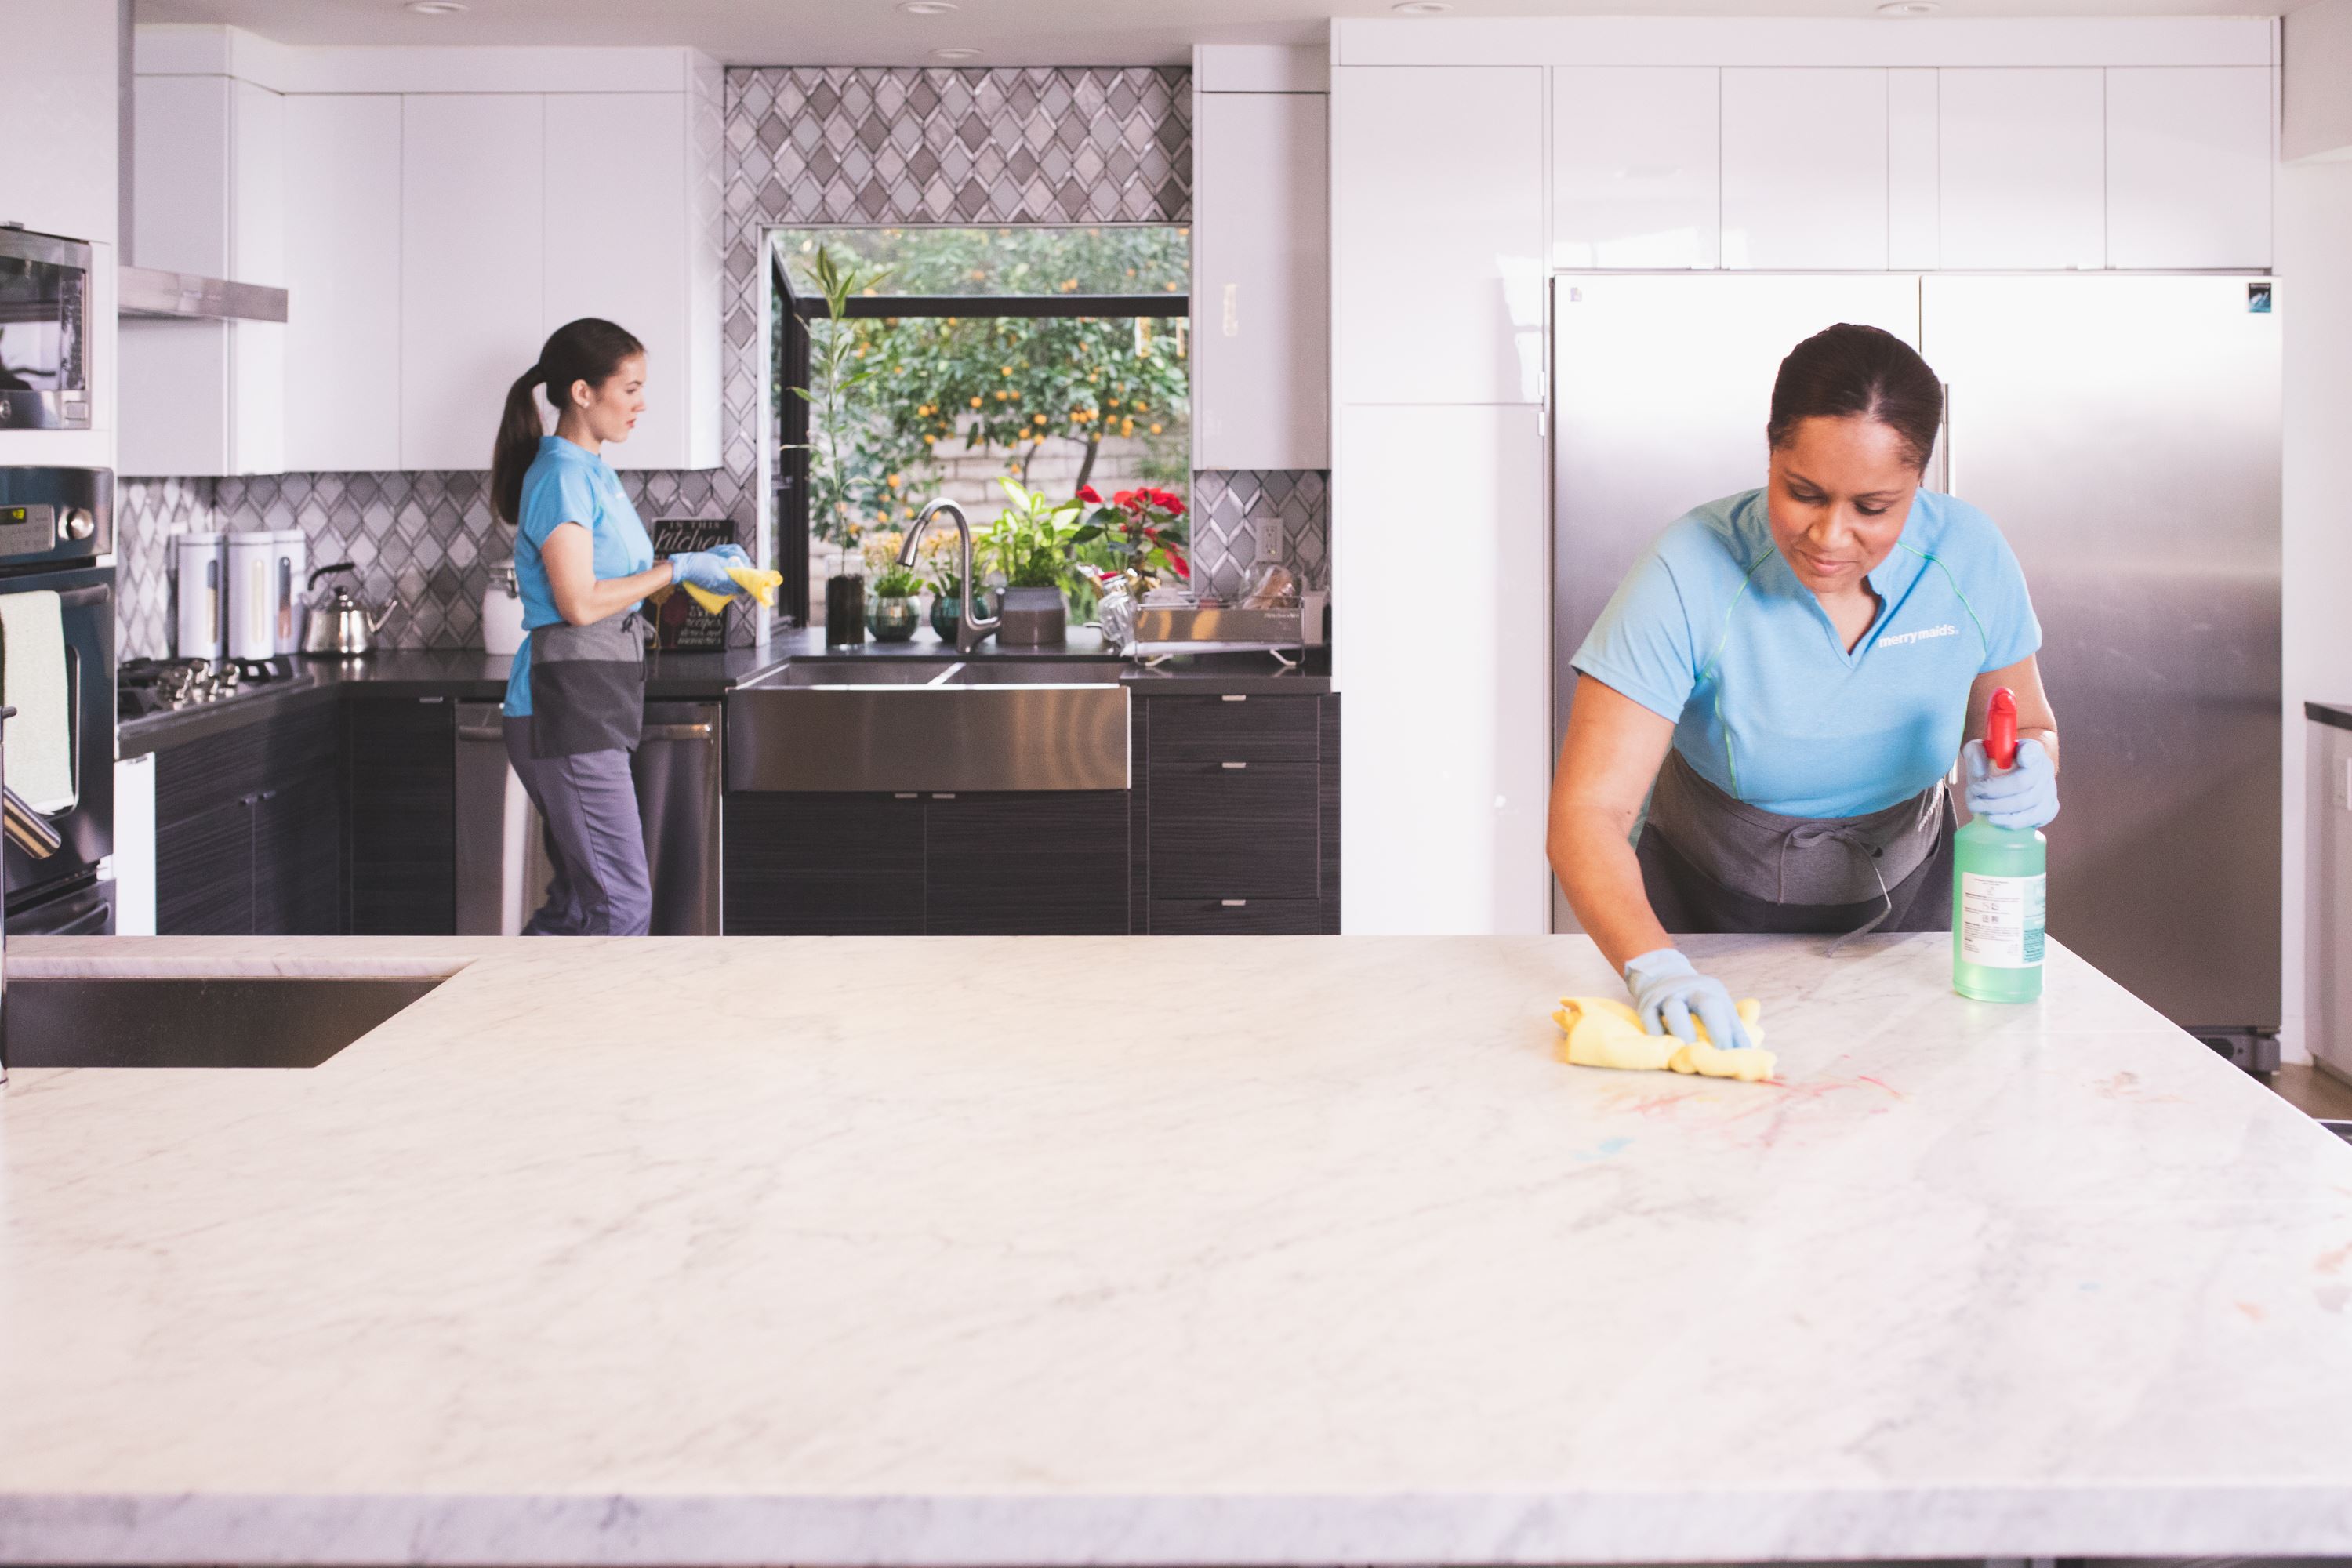 Merry Maids team members sanitizing a kitchen during maid services